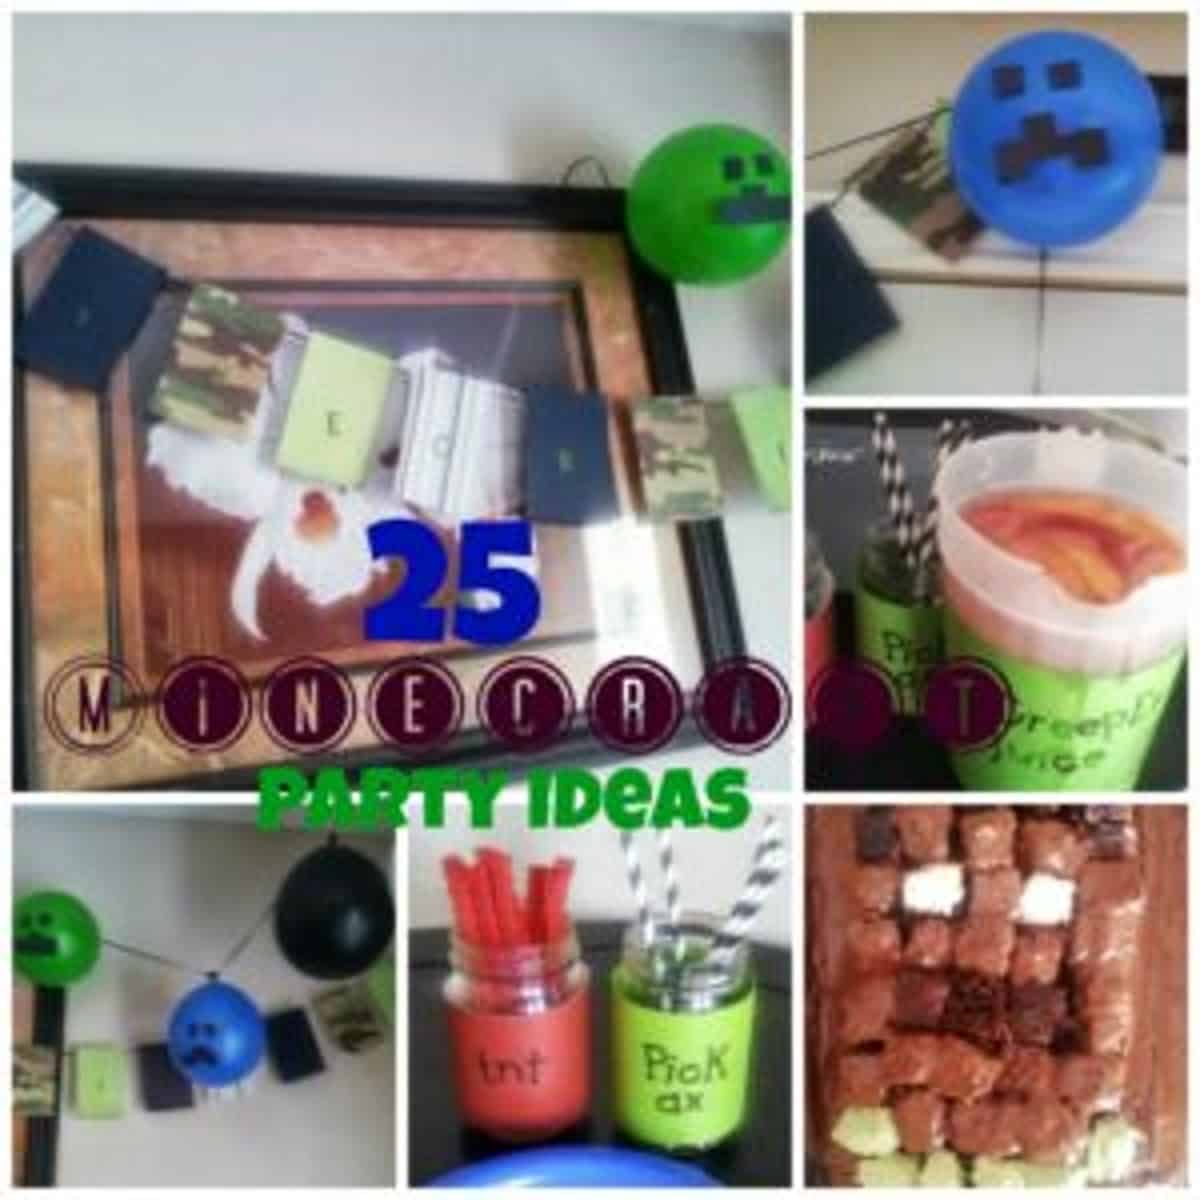 A collage of 25 Minecraft birthday party ideas. The ideas include decorations, food, and games.